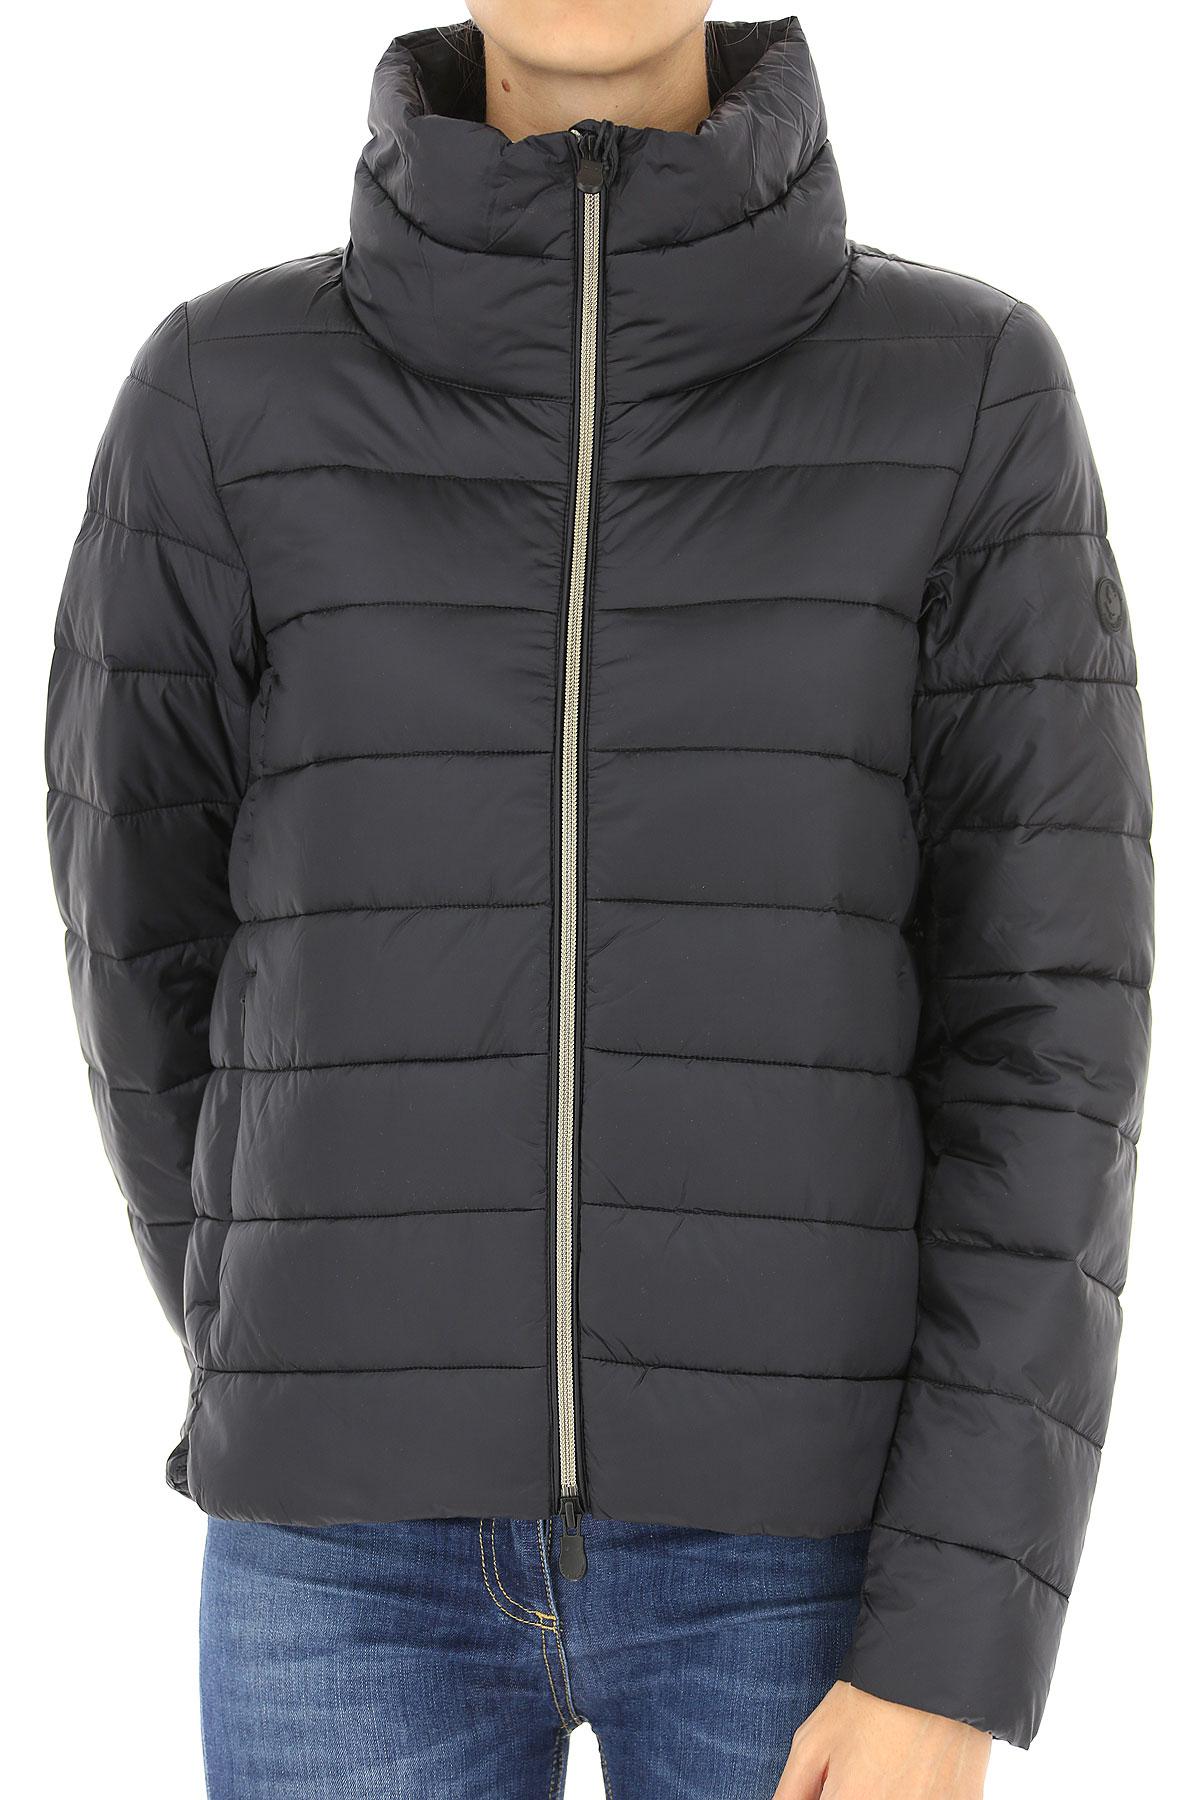 Save The Duck Synthetic Down Jacket For Women in Black - Lyst